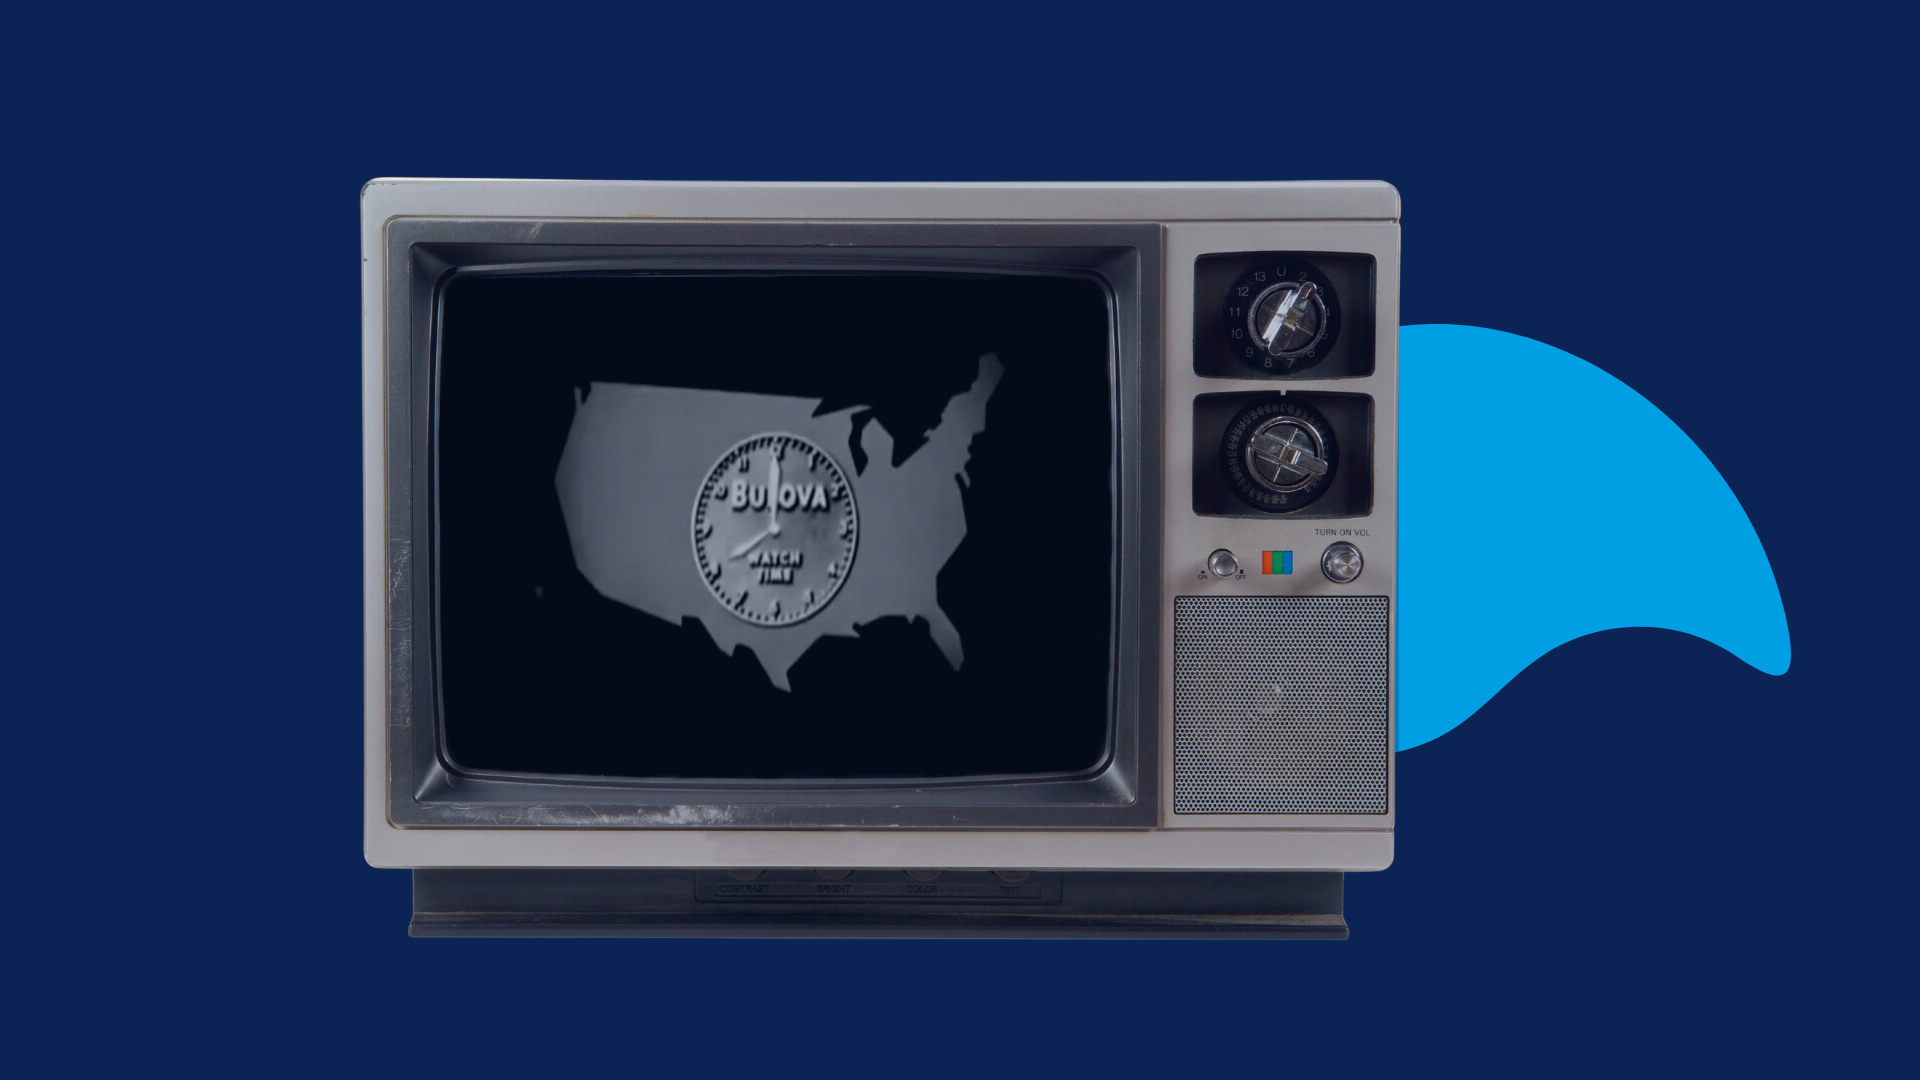 The World's First TV Commercial: A Milestone in Advertising